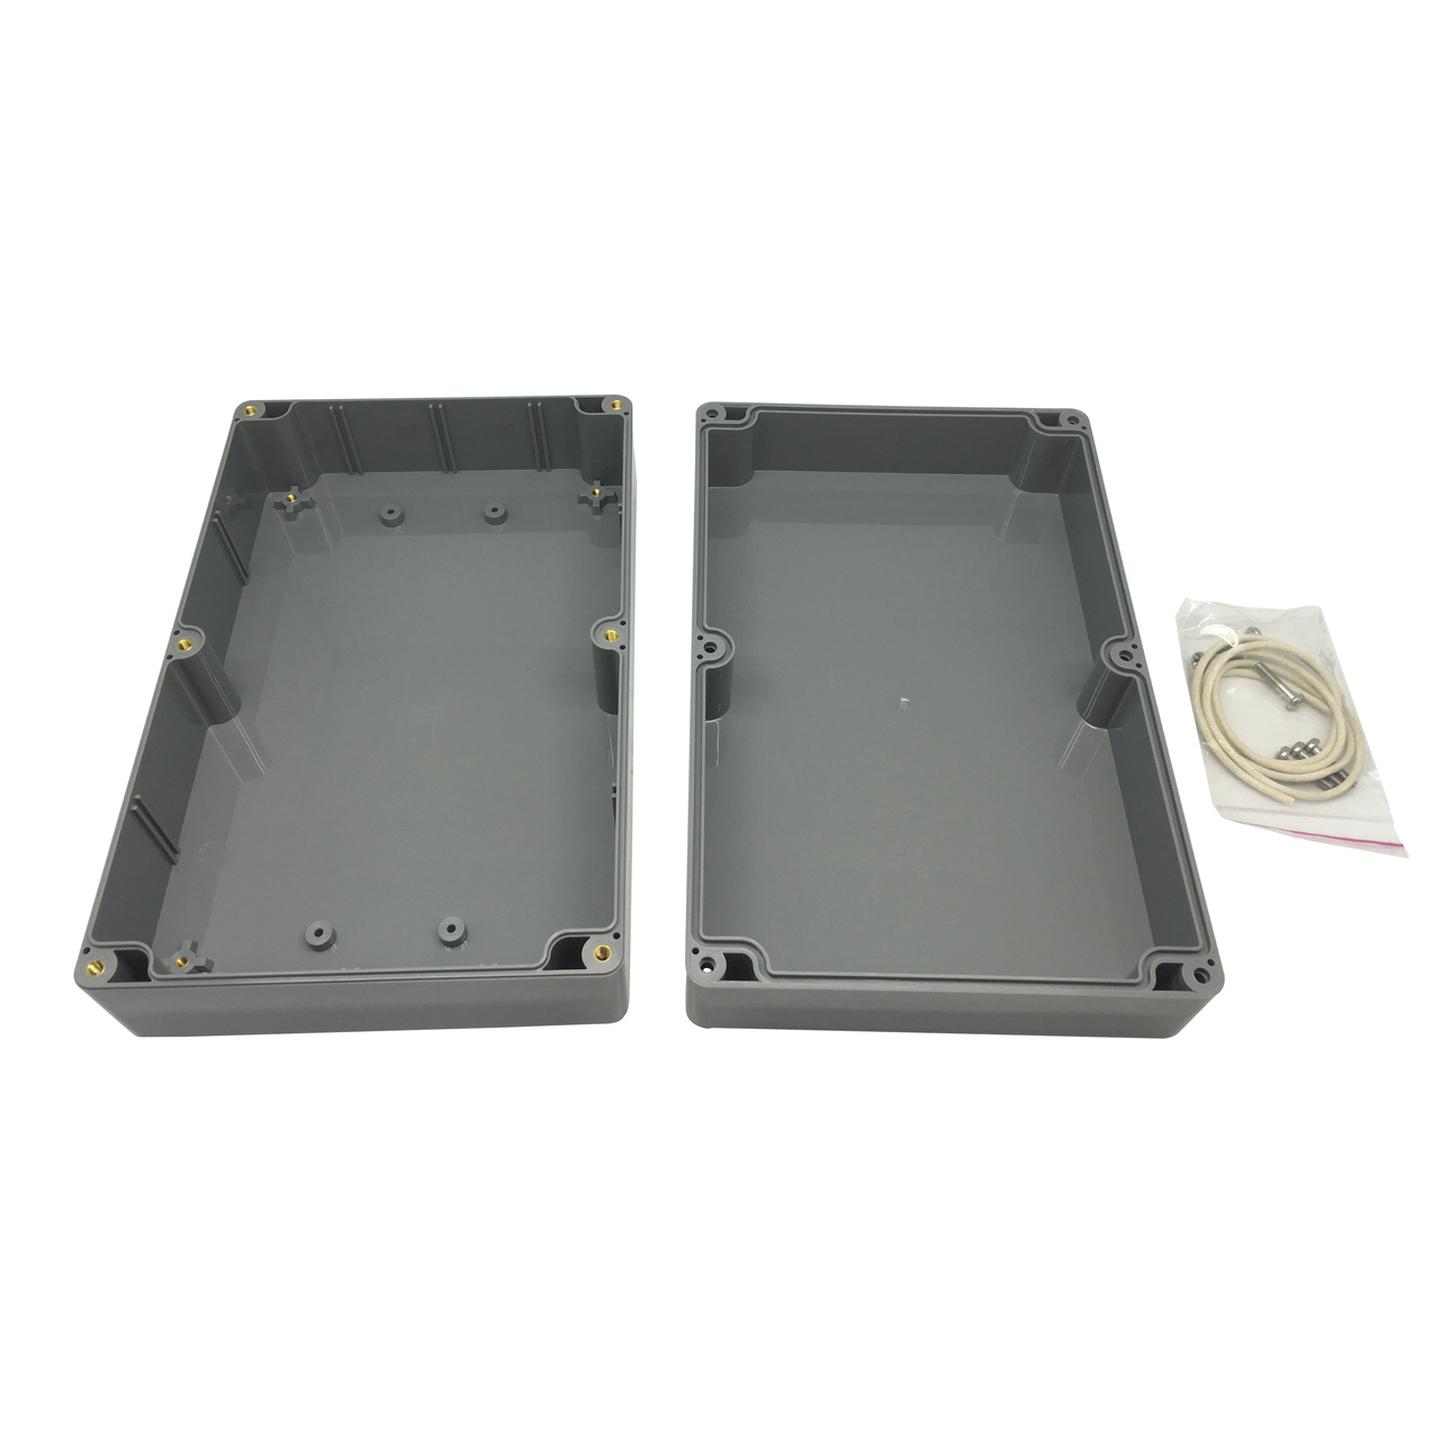 Sealed ABS Enclosure - 222 x 146 x 75mm